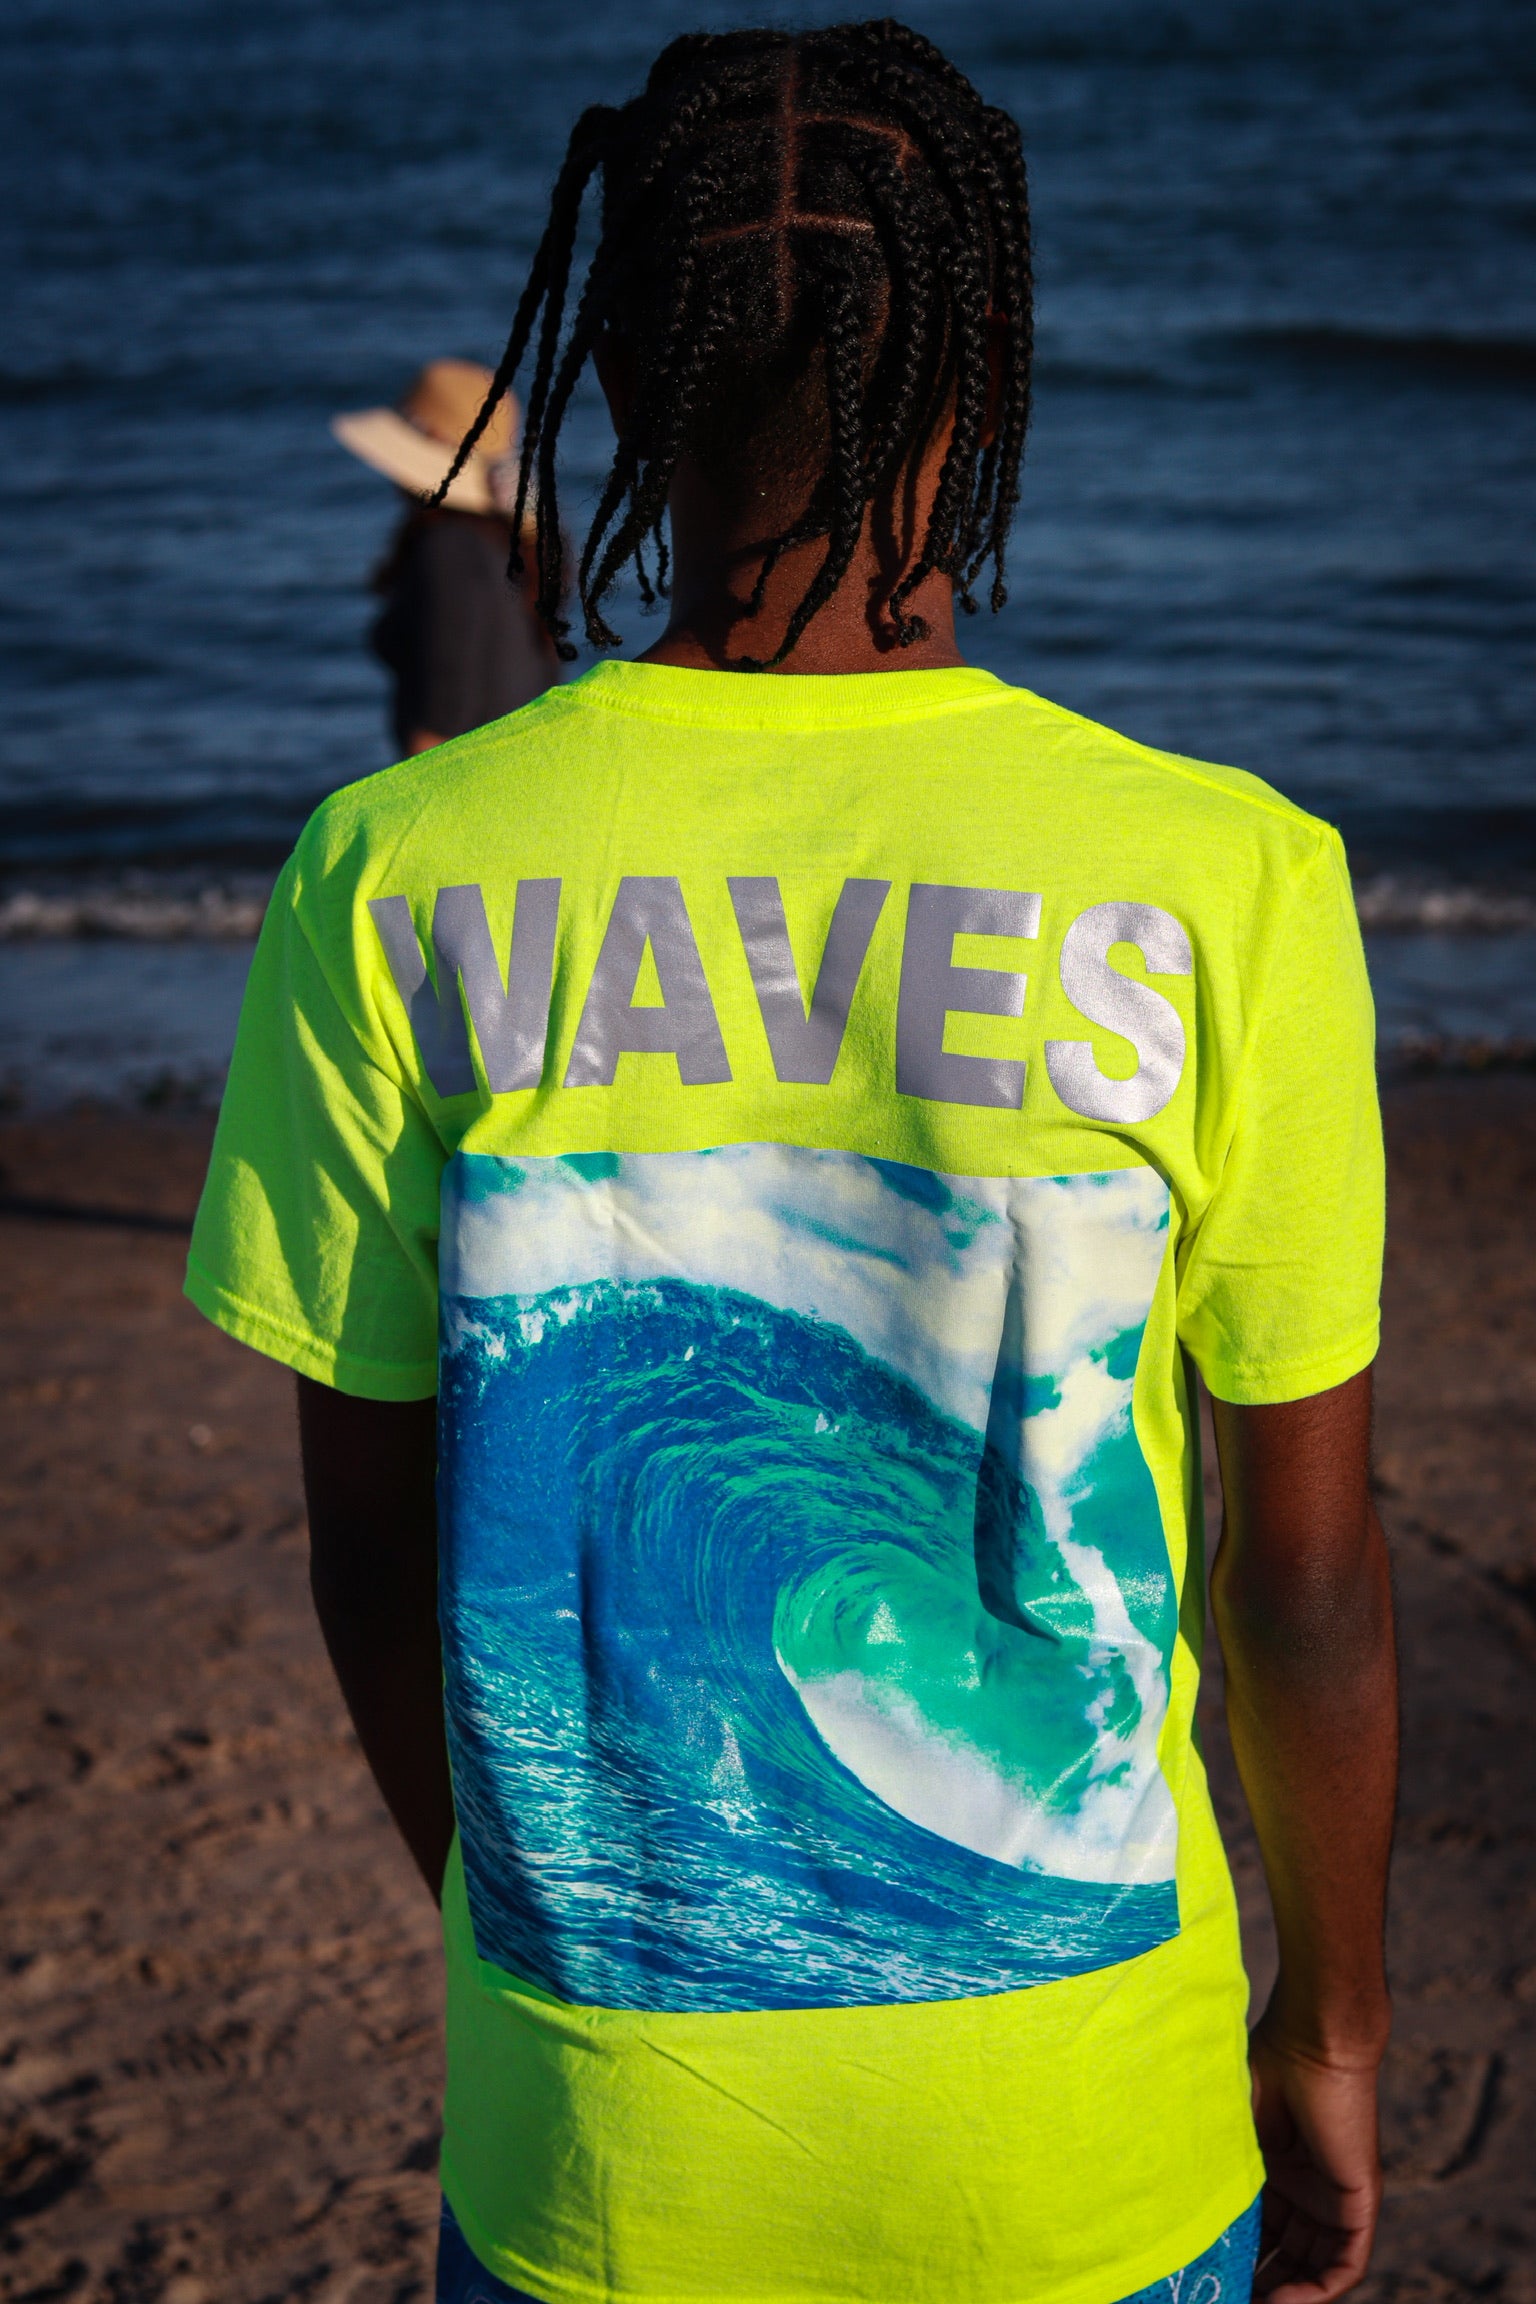 RIDE THE WAVE T-SHIRT 3M - SAFETY GREEN